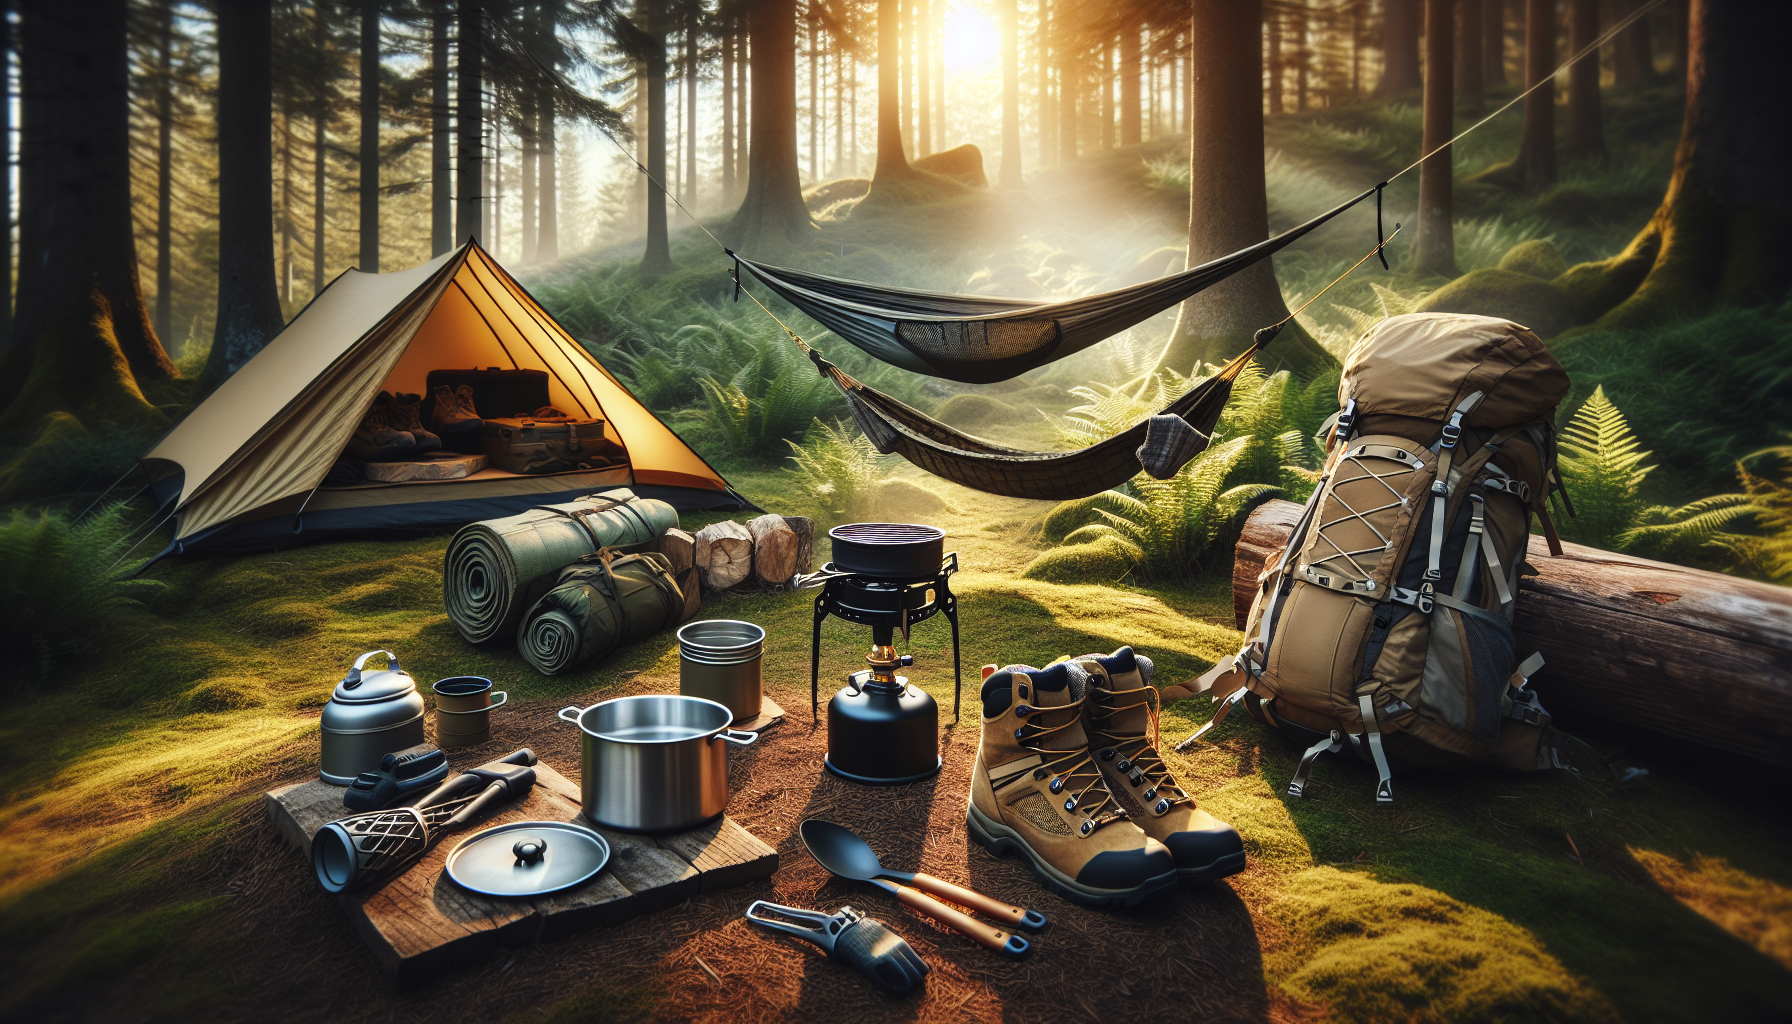 The Ultimate Camping Gear Checklist For Your Next Adventure